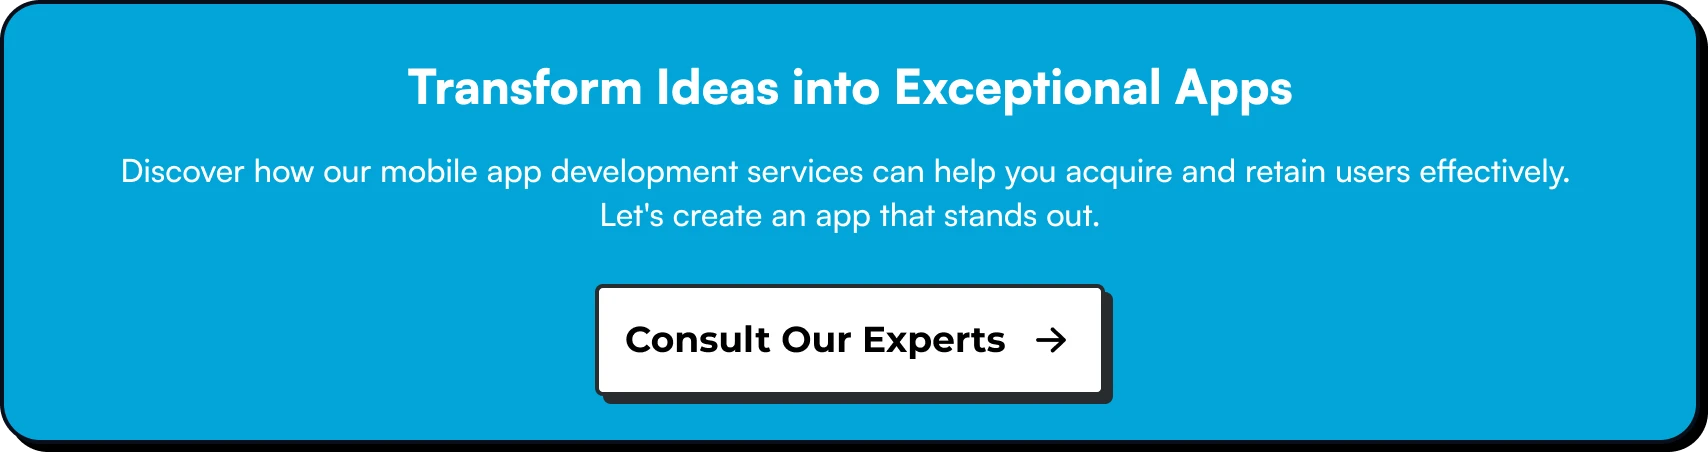 Transform Ideas into Exceptional Apps